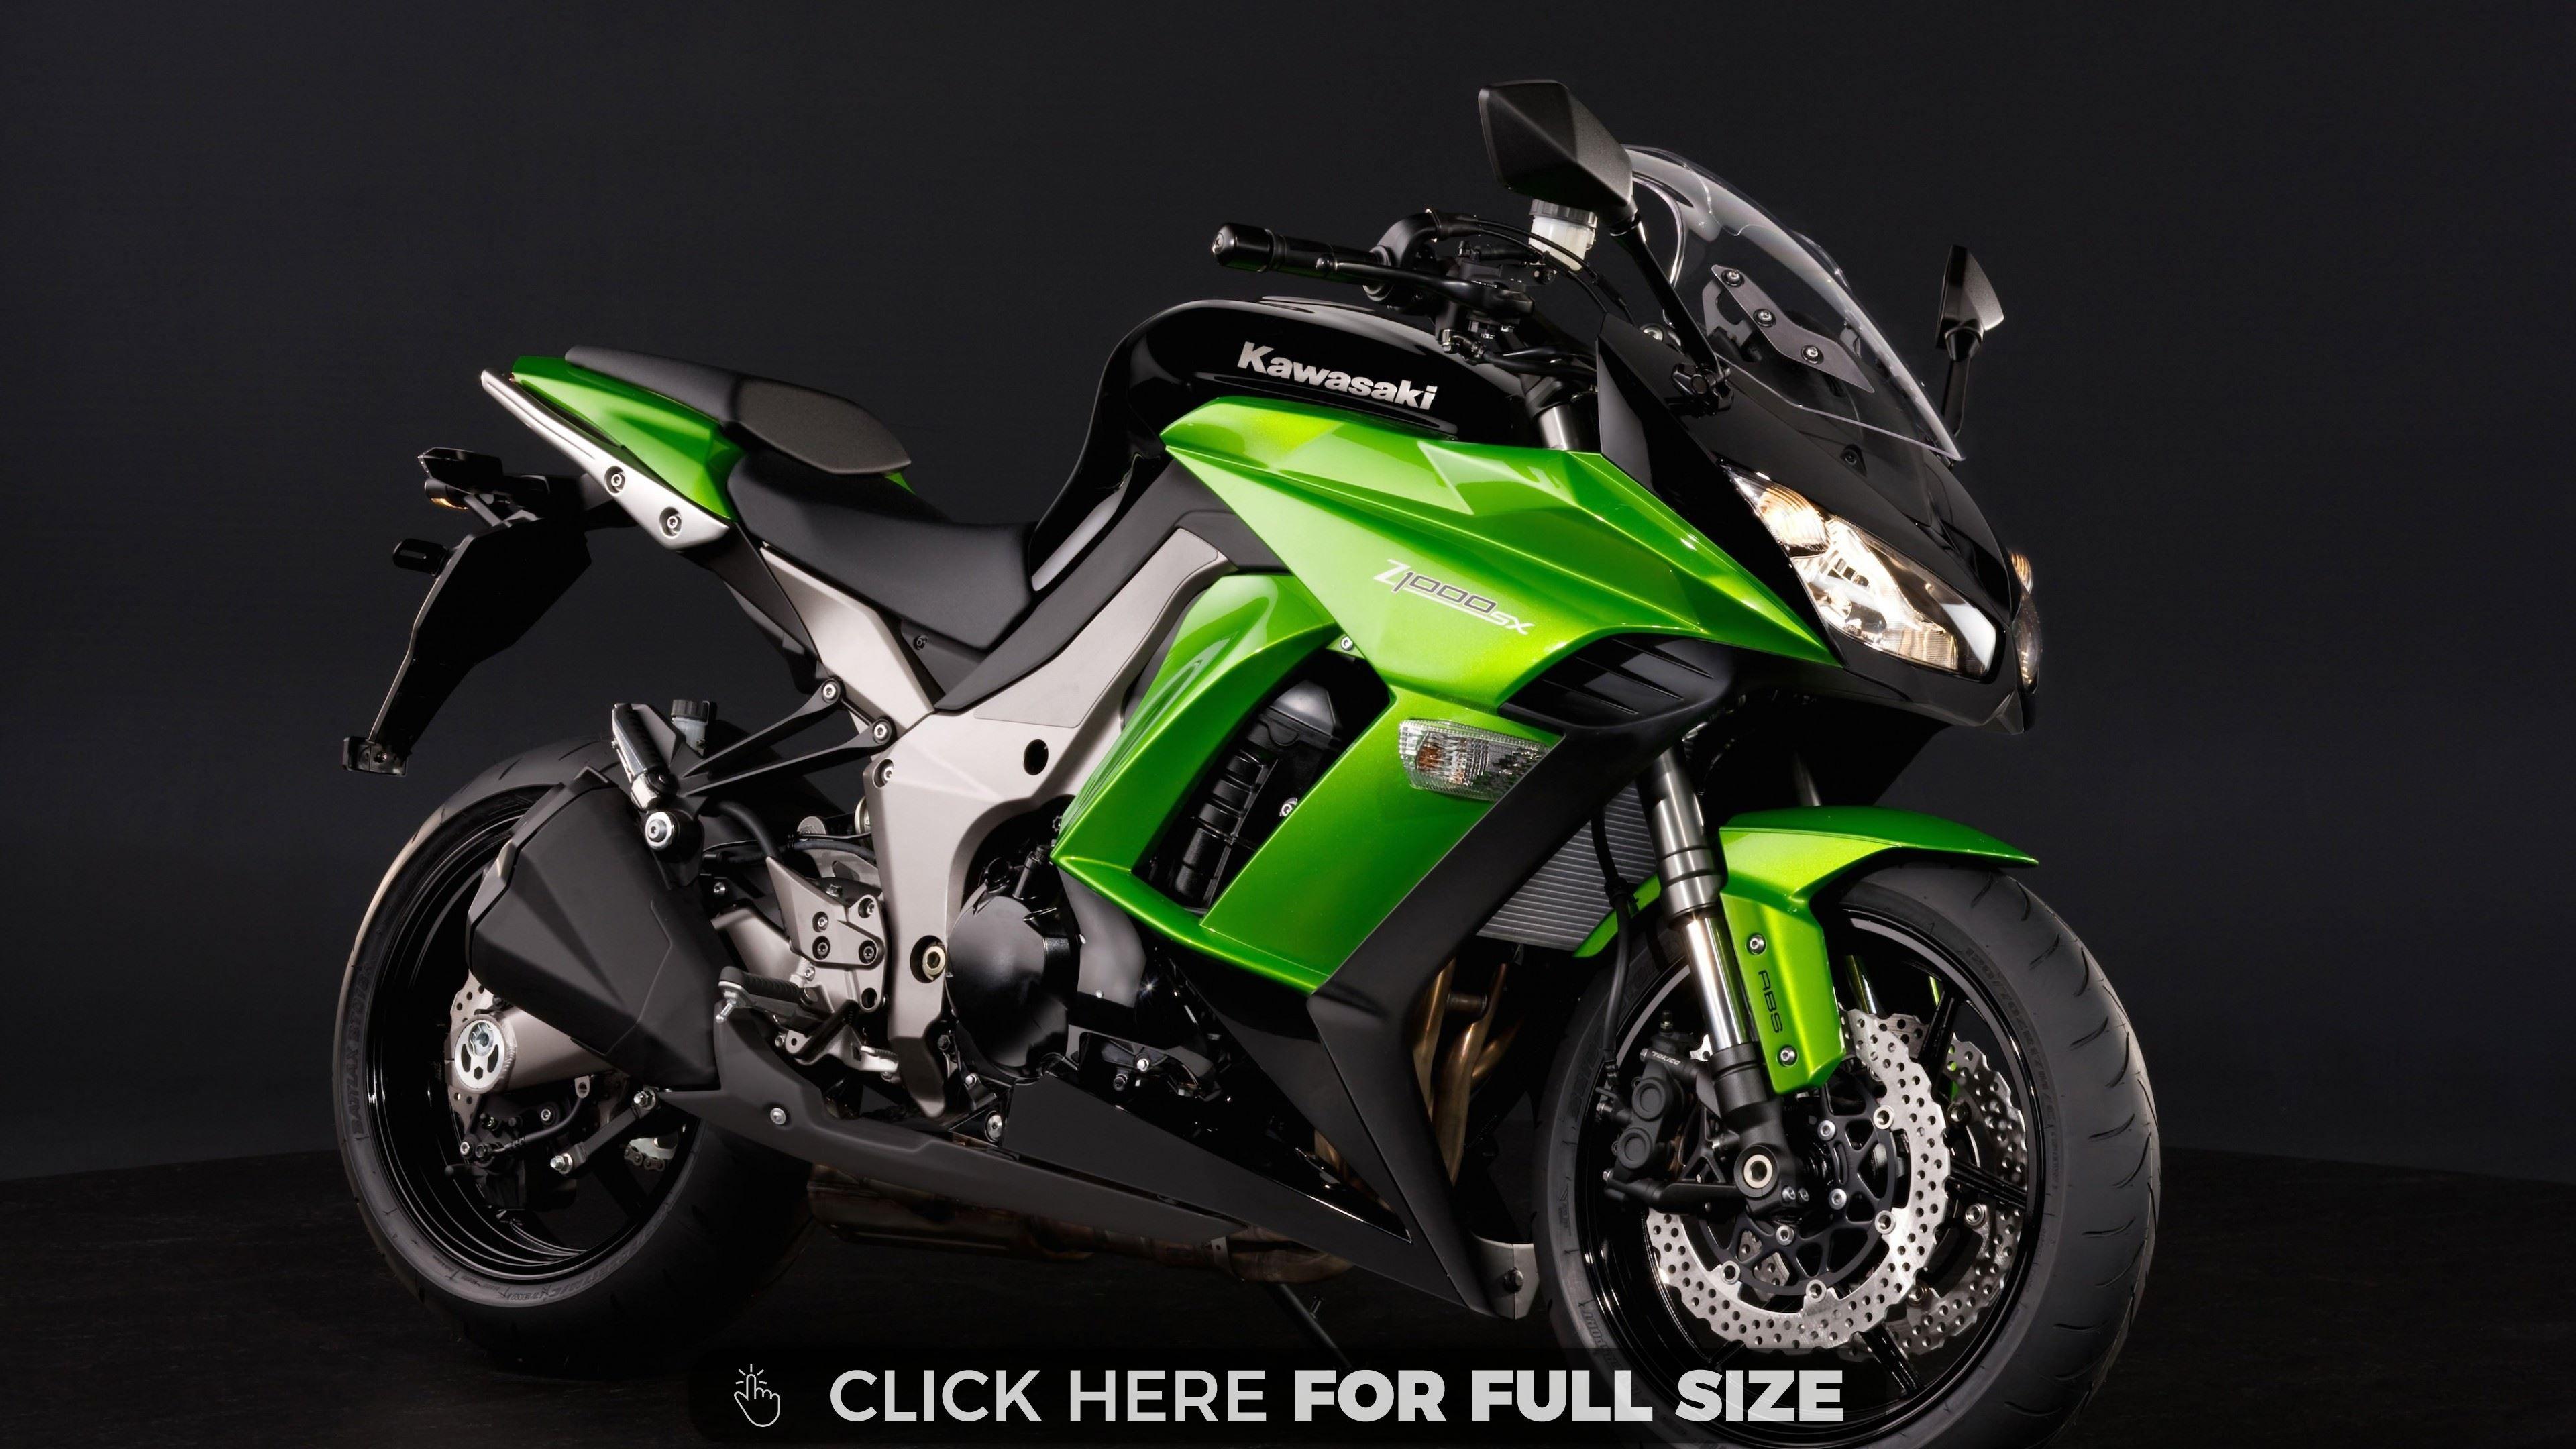 Kawasaki 4K wallpaper for your desktop or mobile screen free and easy to download